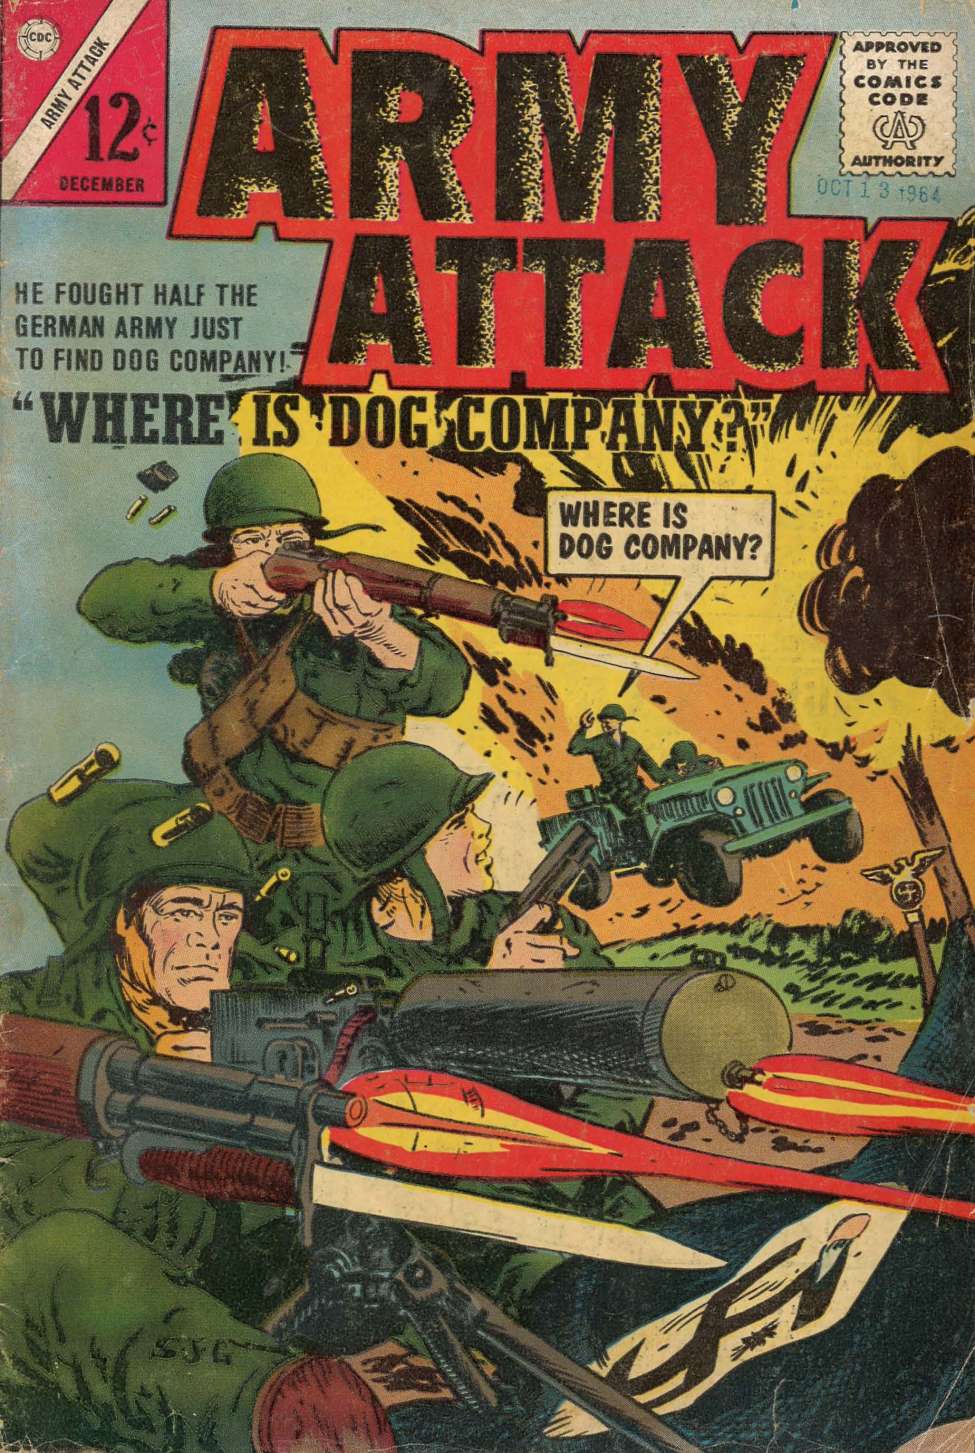 Book Cover For Army Attack 3